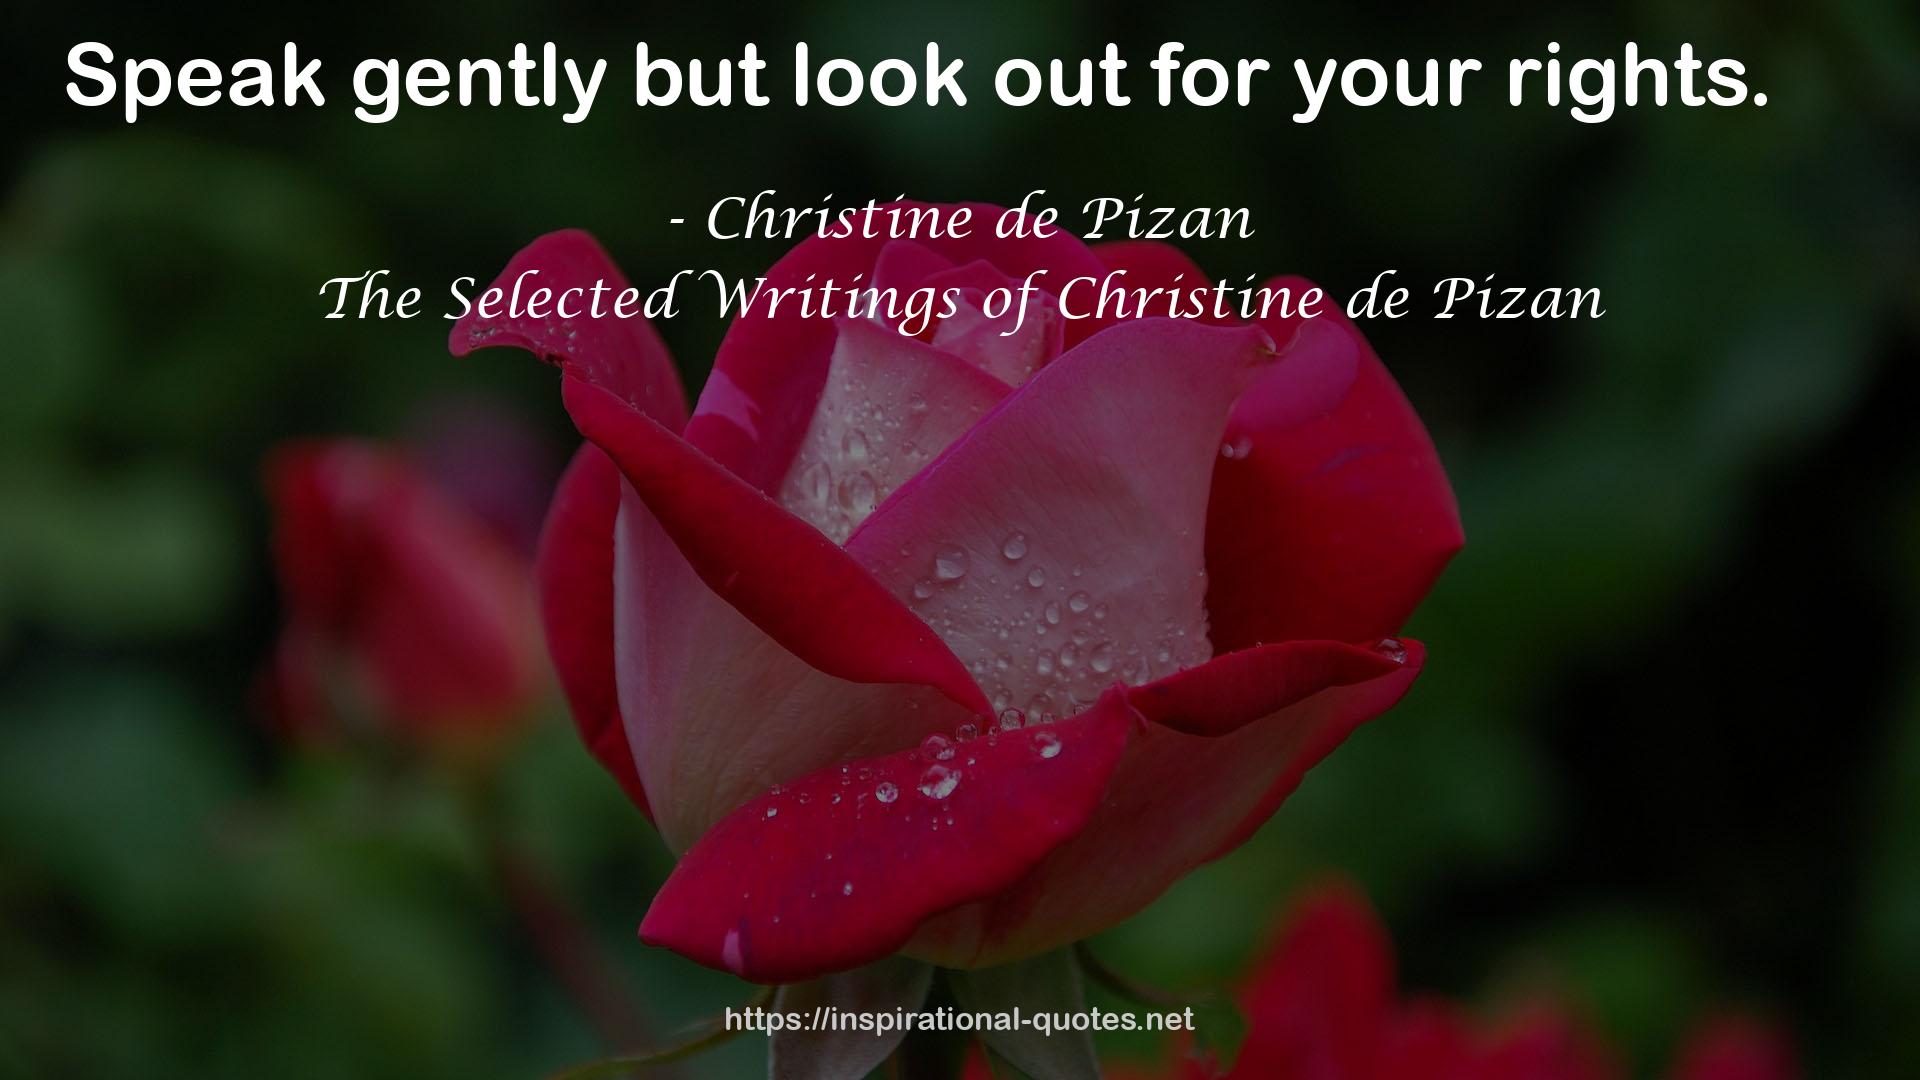 The Selected Writings of Christine de Pizan QUOTES